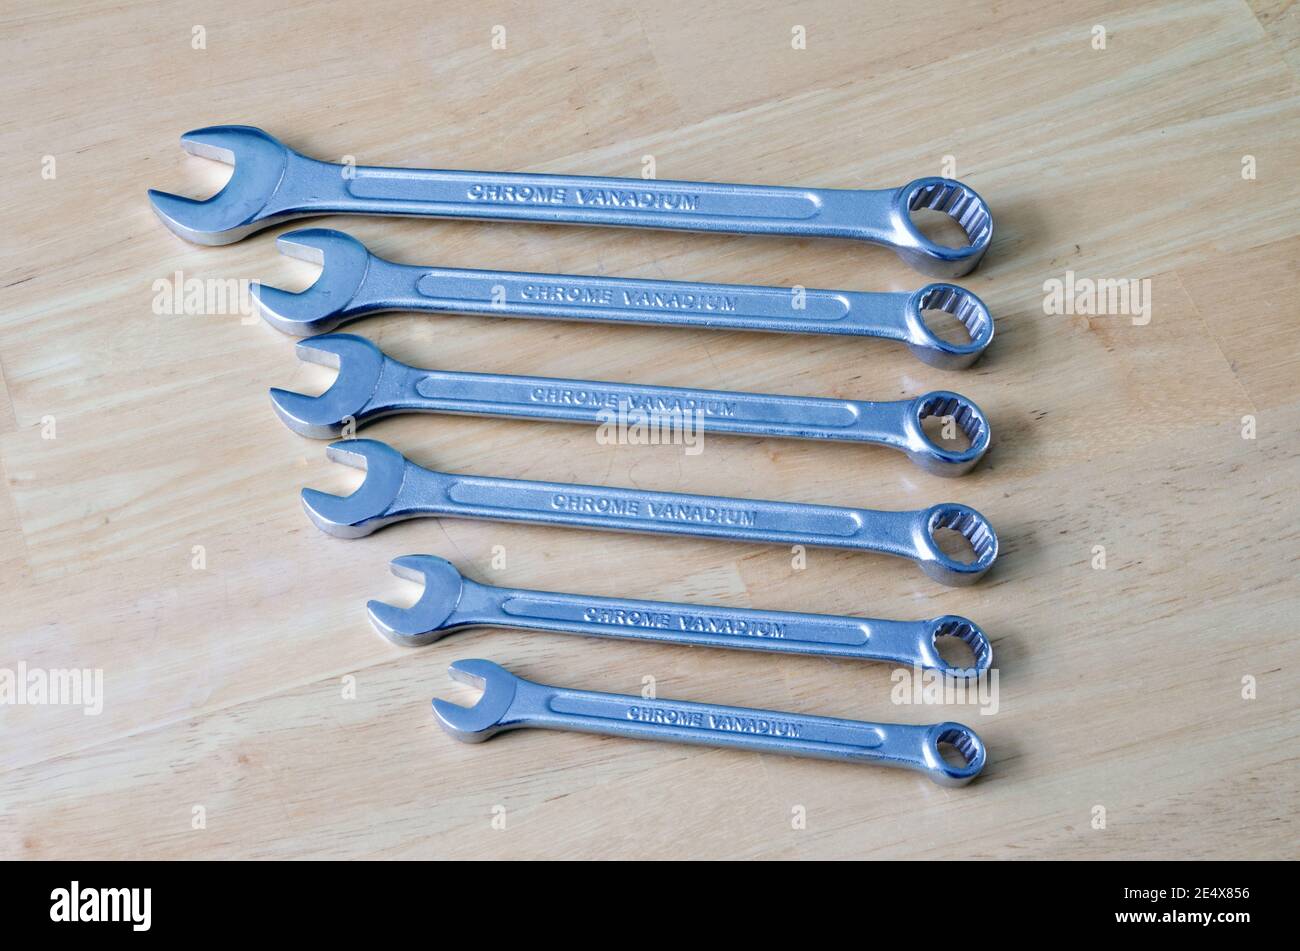 A Set Of Metal Chrome Vanadium Ring Spanners or Wrenches Hand Tools Stock Photo